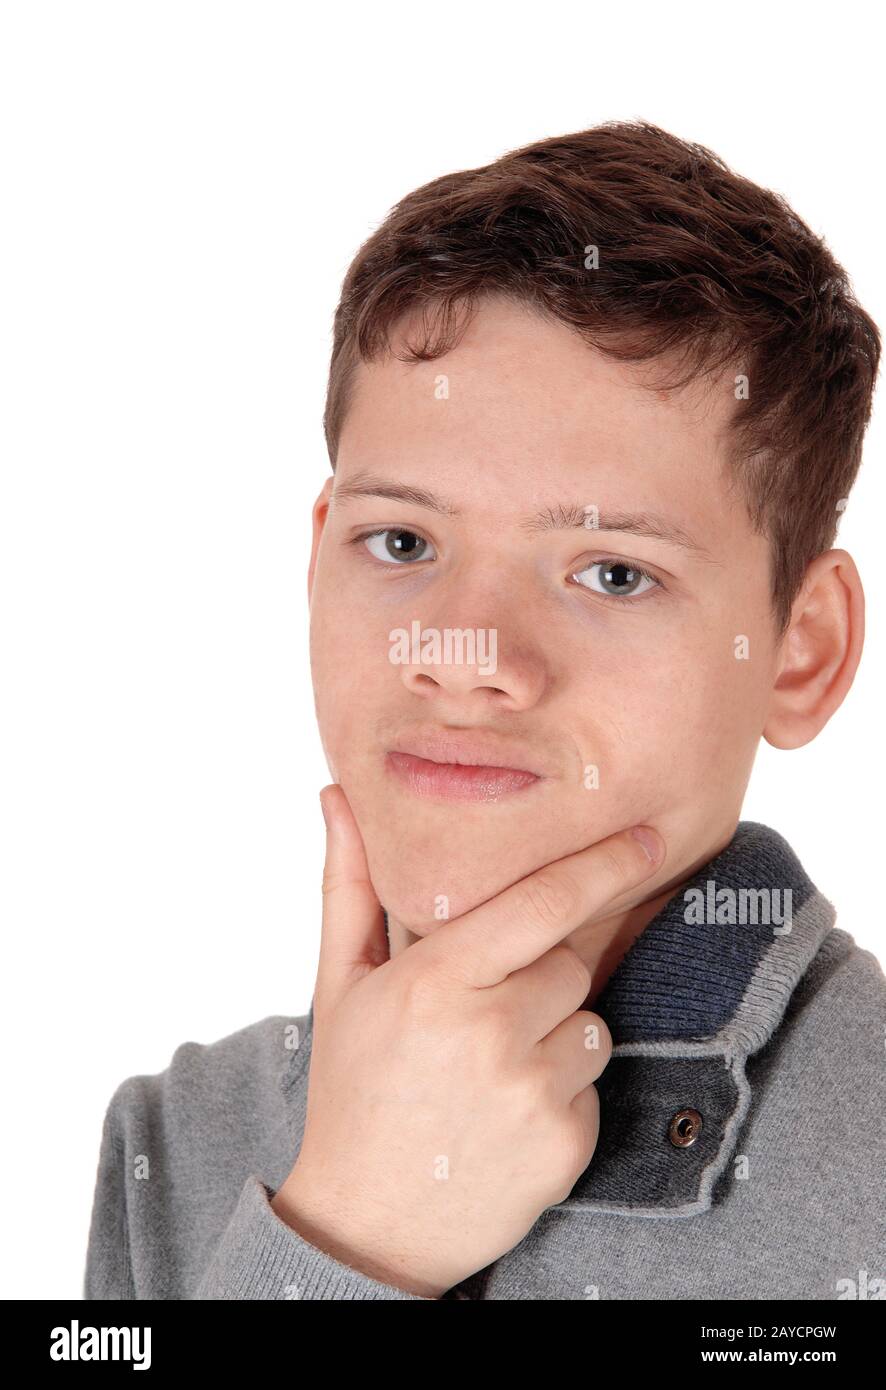 Close up portrait of a teenager boy Stock Photo